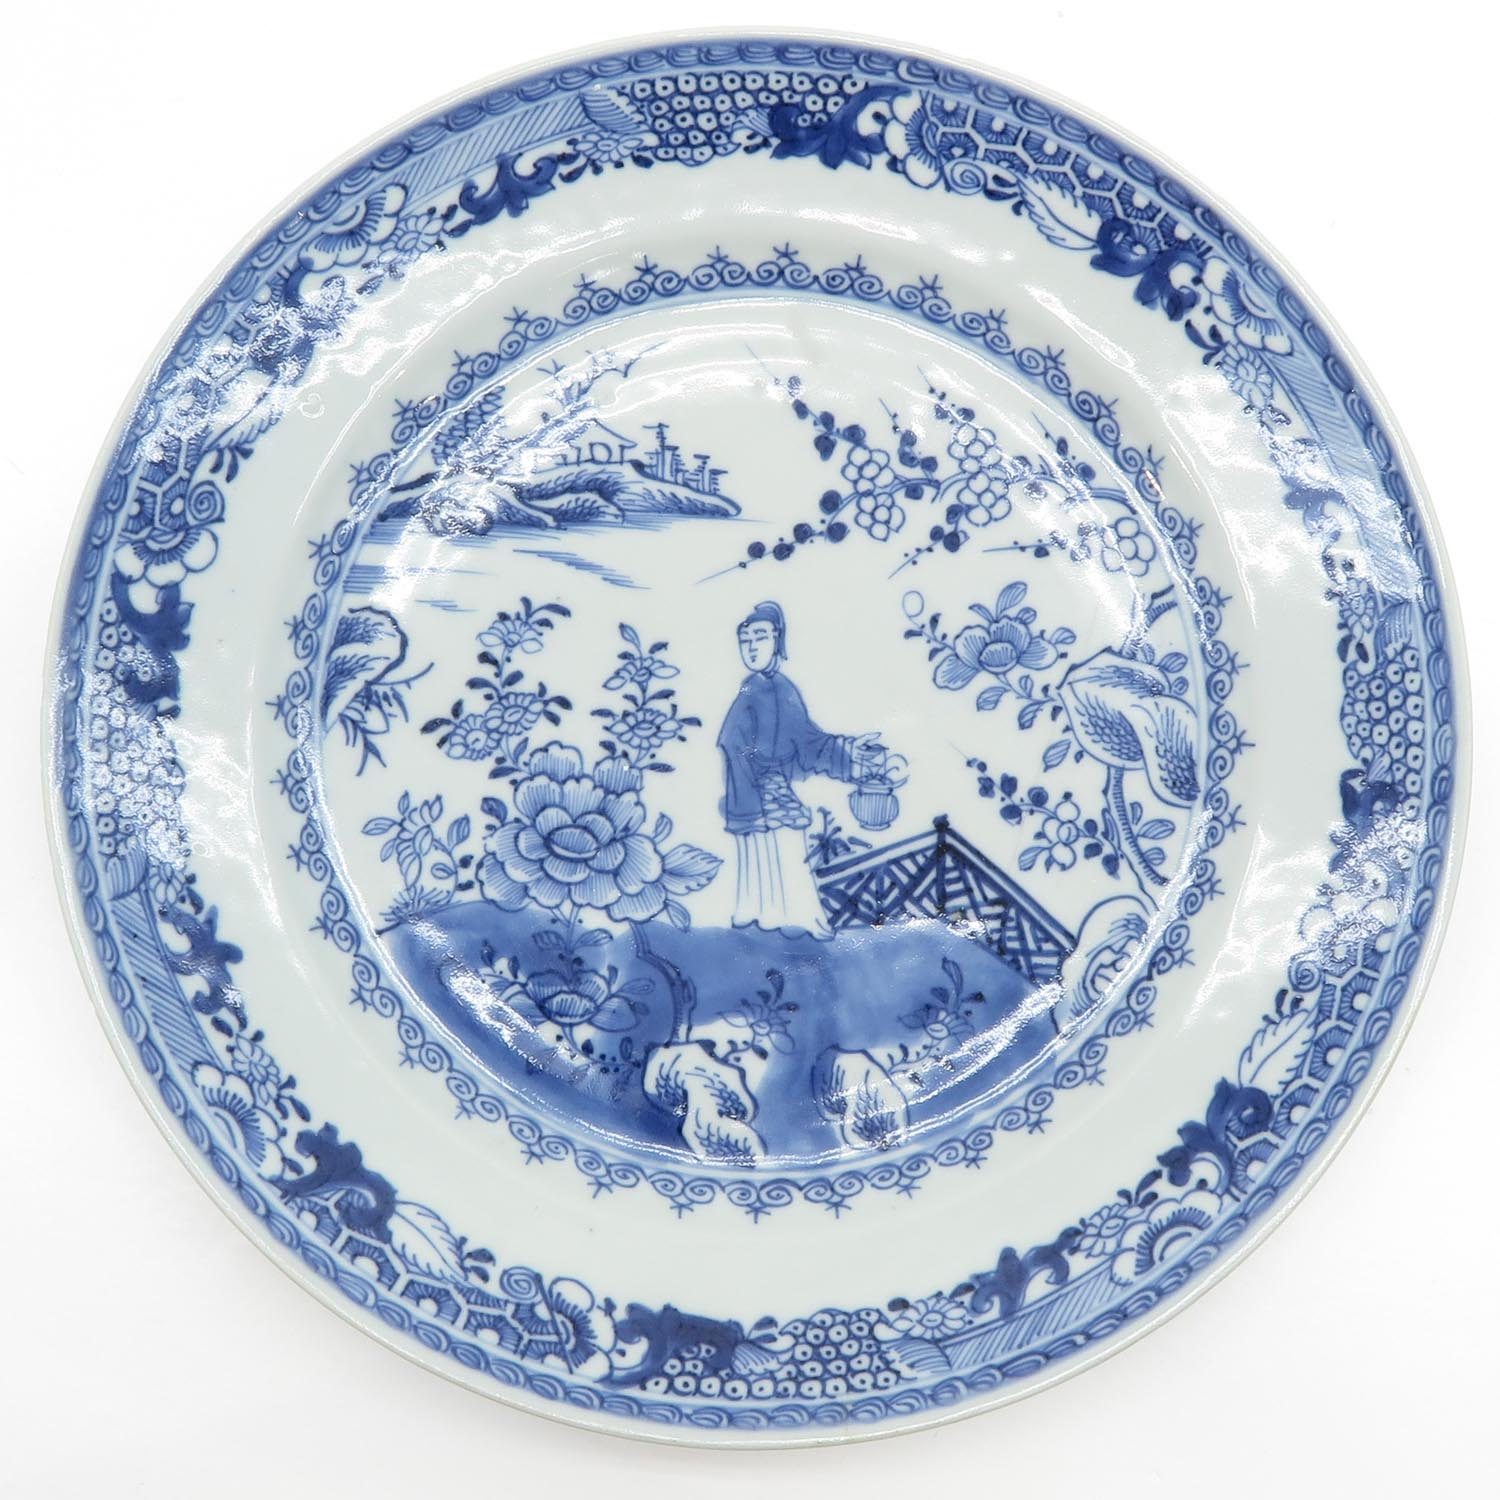 18th / 19th Century China Porcelain Plate